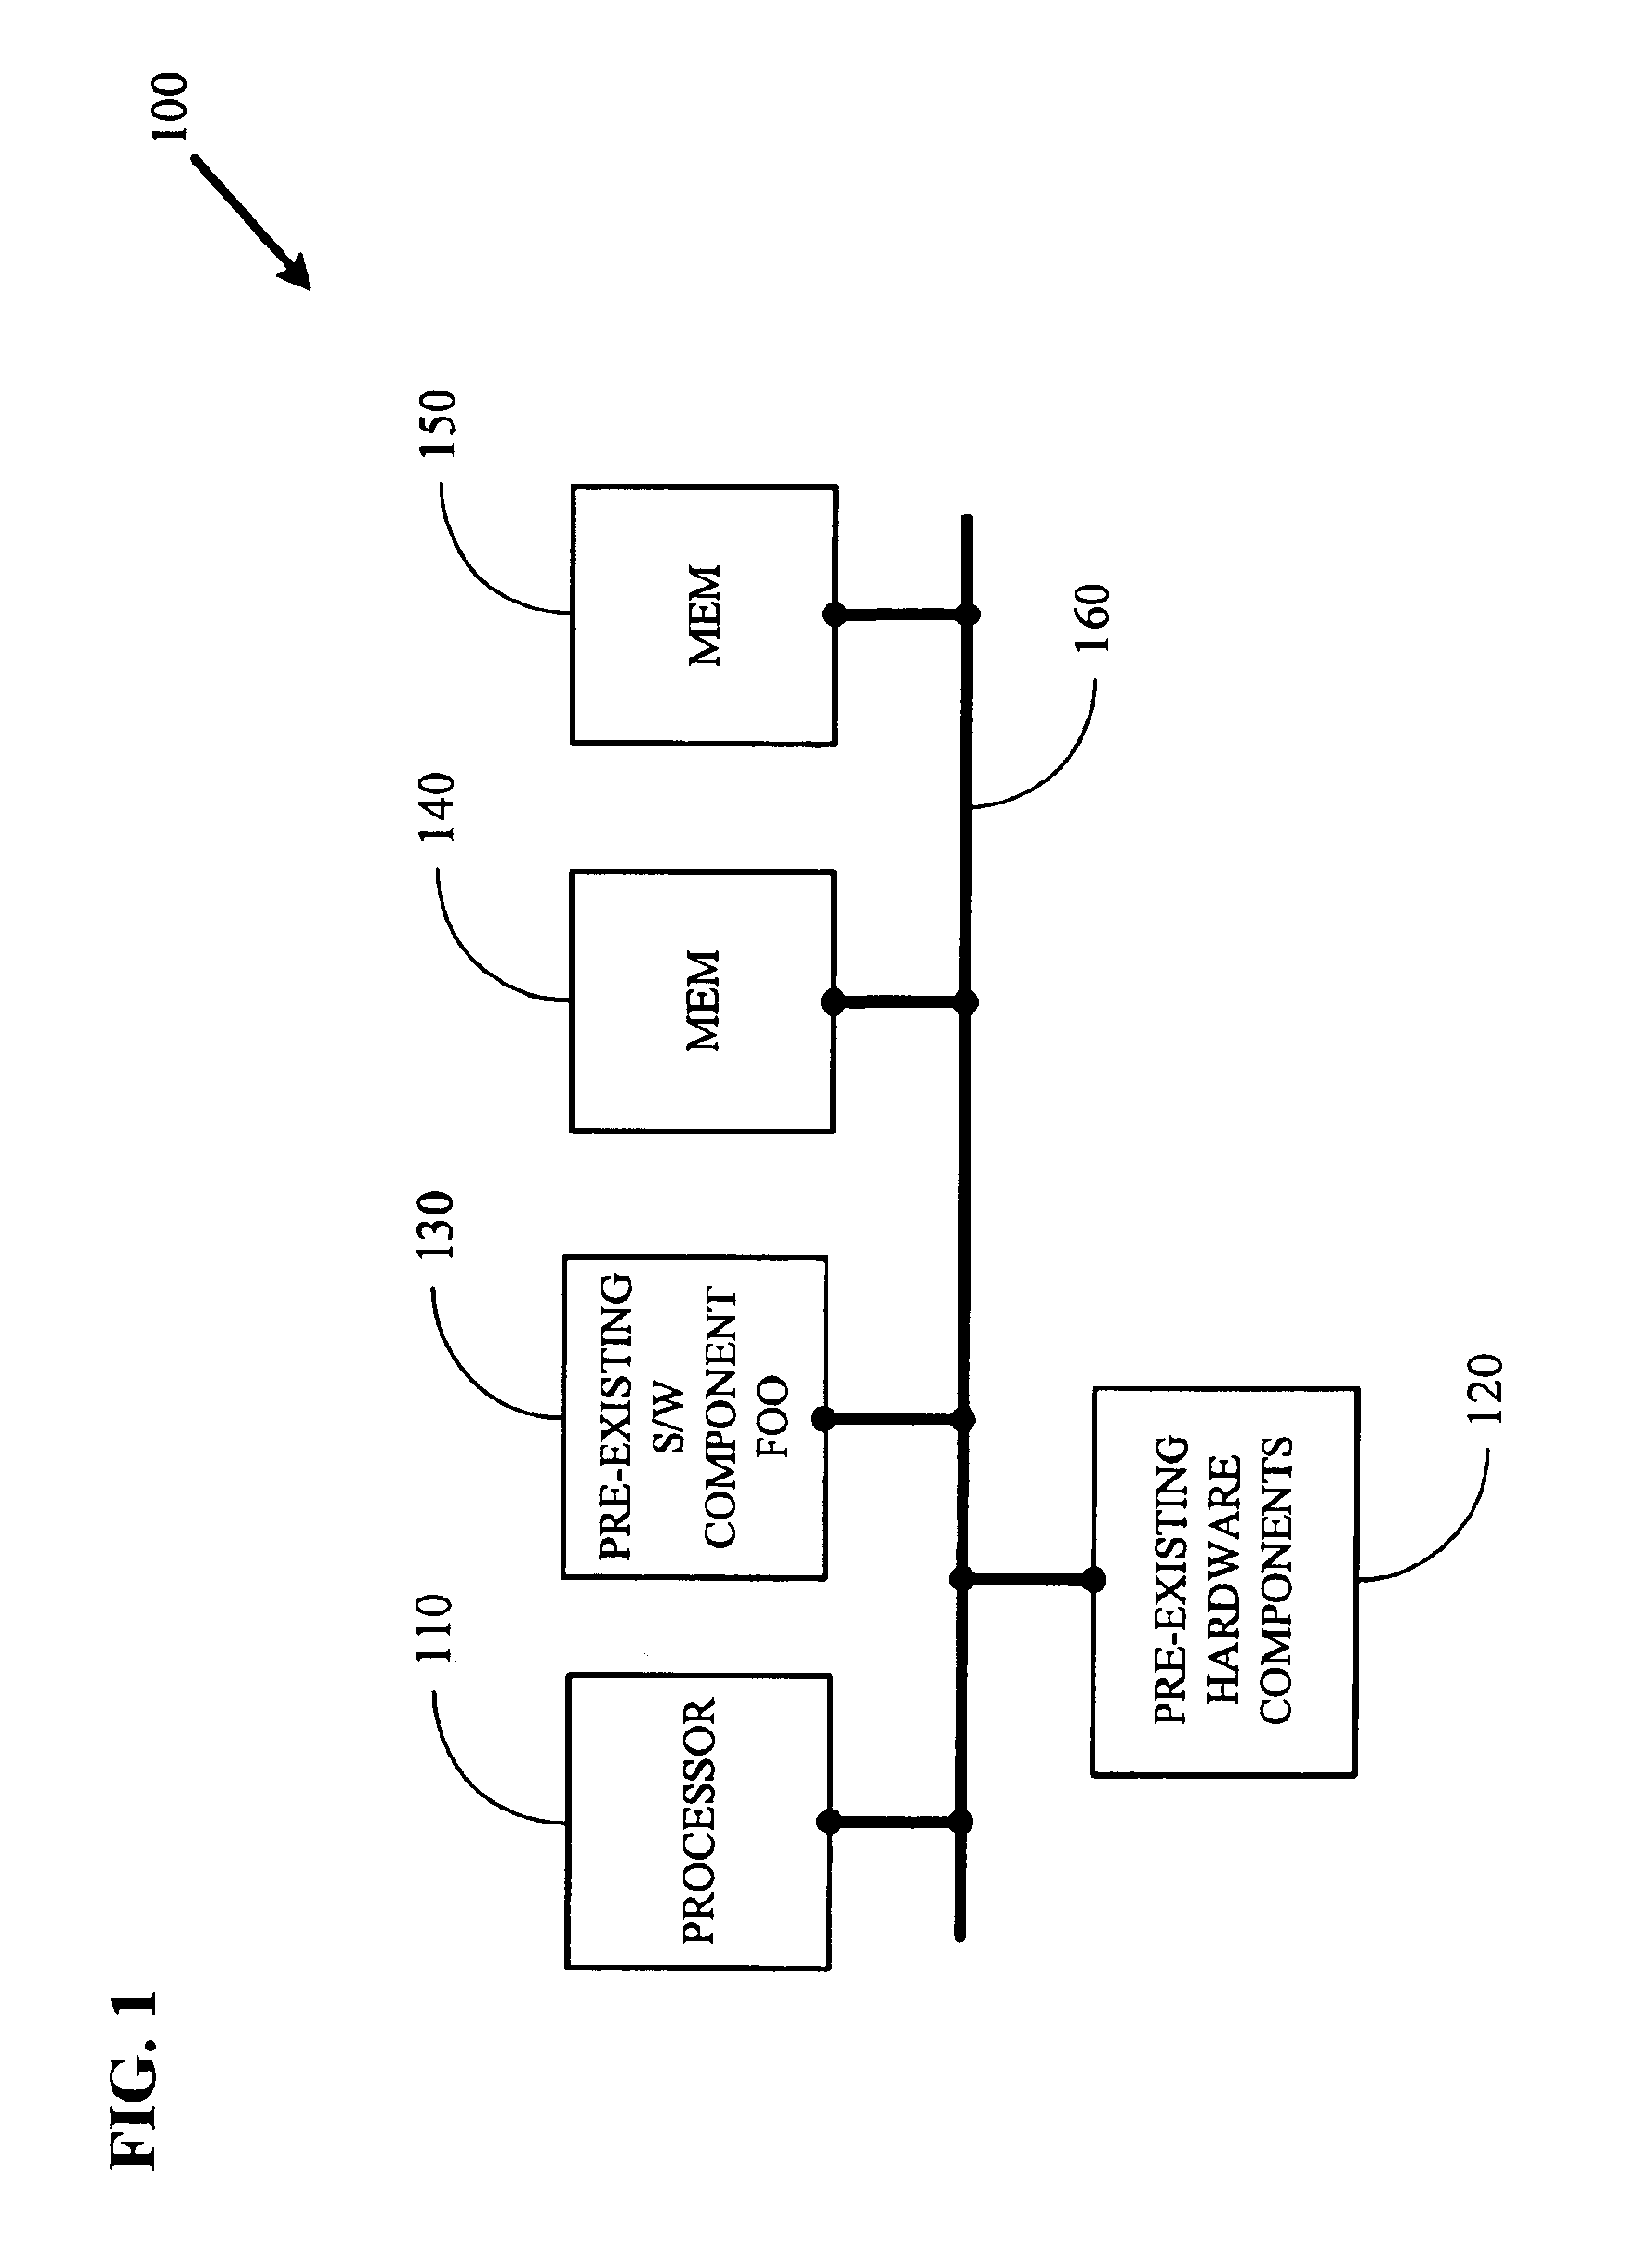 Repartitioning performance estimation in a hardware-software system